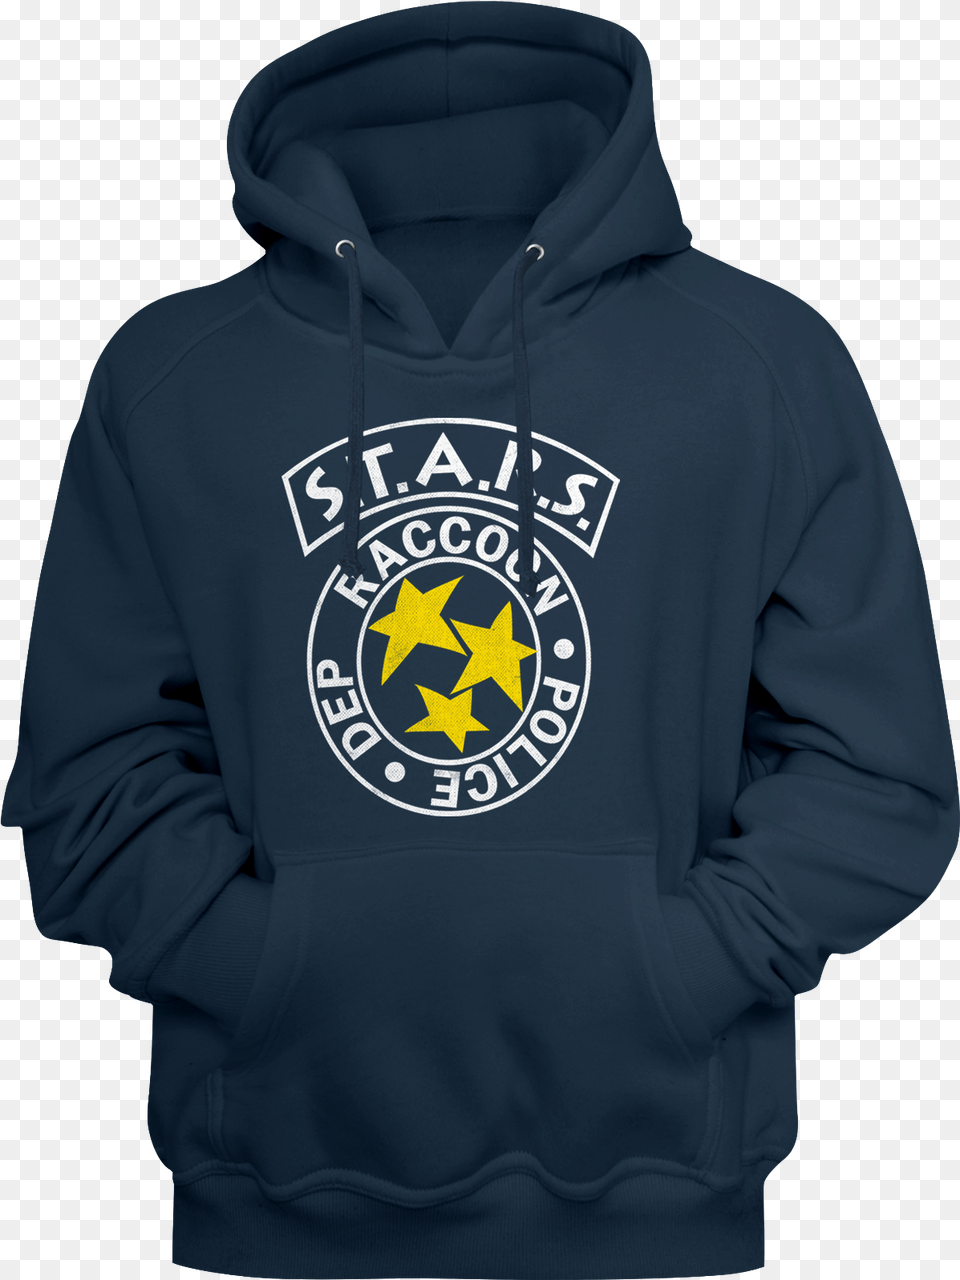 Stars Resident Evil Hoodie Ladies Funny Christmas Shirts, Clothing, Knitwear, Sweater, Sweatshirt Free Transparent Png